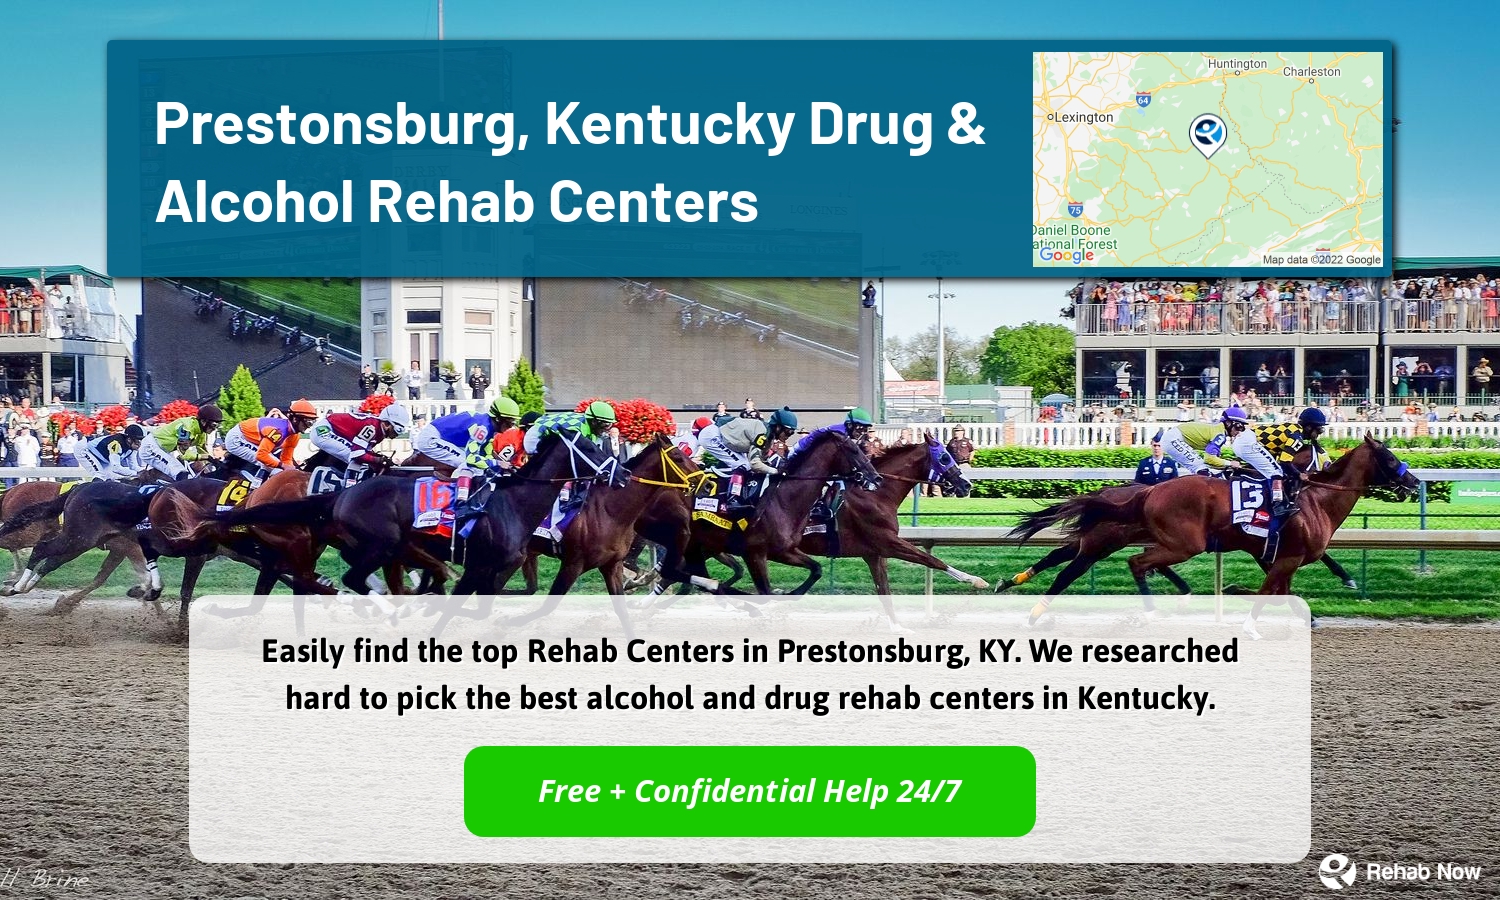 Easily find the top Rehab Centers in Prestonsburg, KY. We researched hard to pick the best alcohol and drug rehab centers in Kentucky.